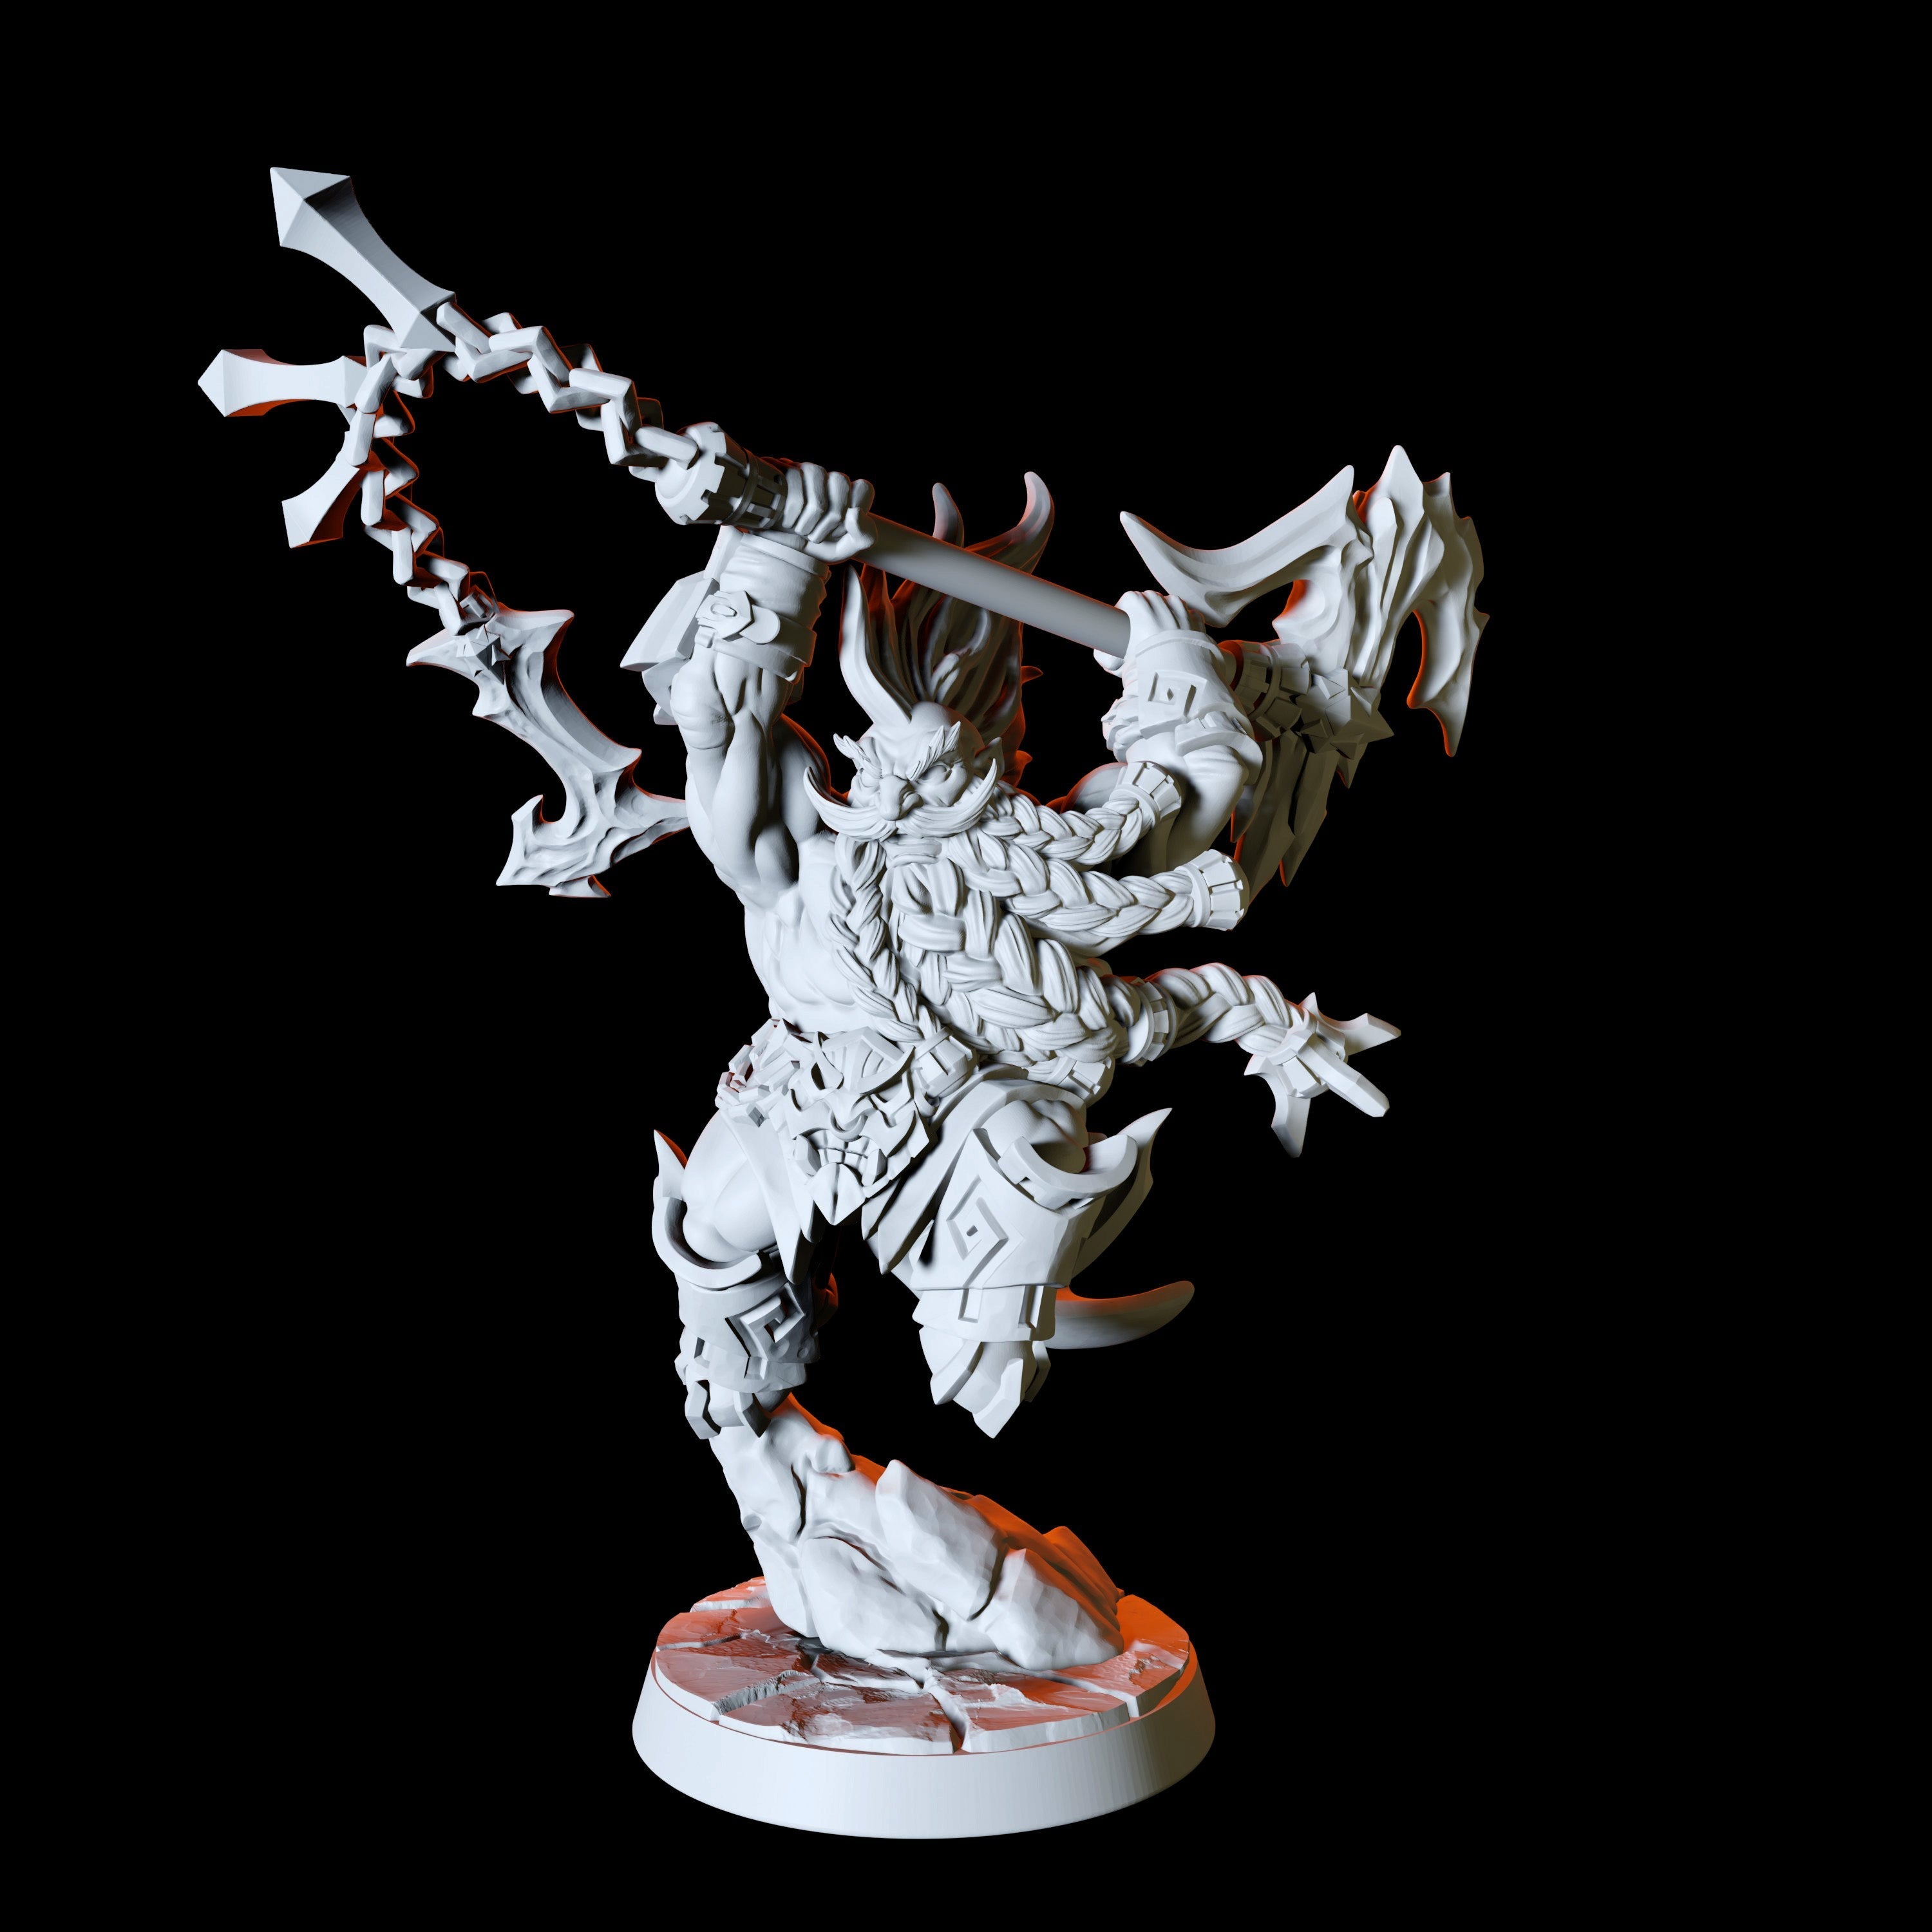 Axe Wielding Dwarf Miniature for Dungeons and Dragons